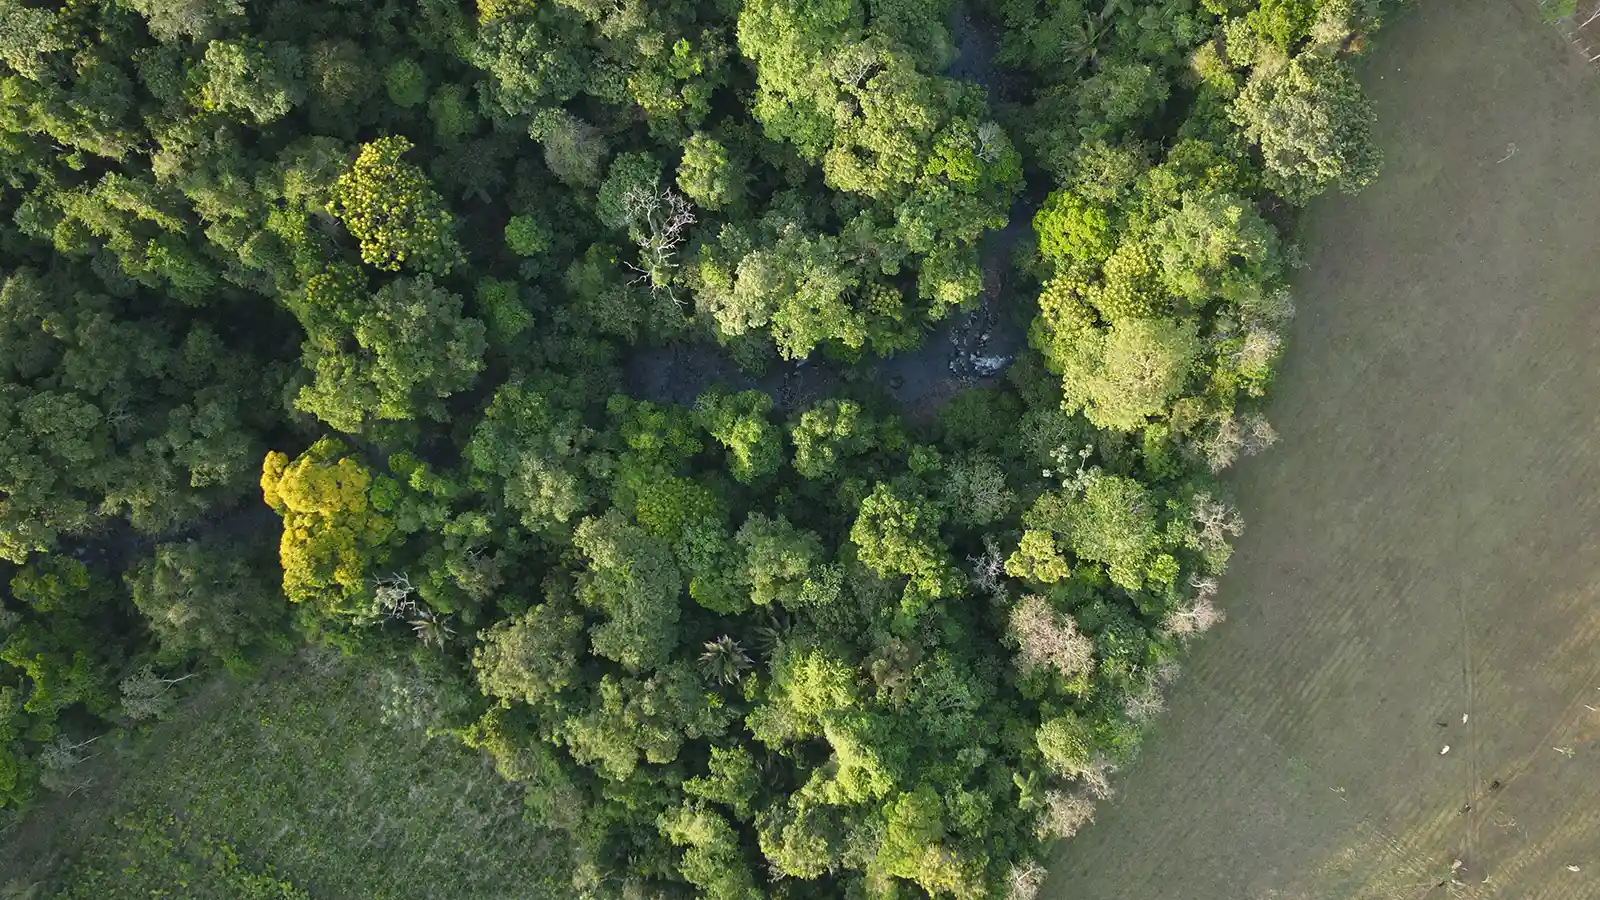 A birds eye view of the Forest that surrounds Rio Celeste